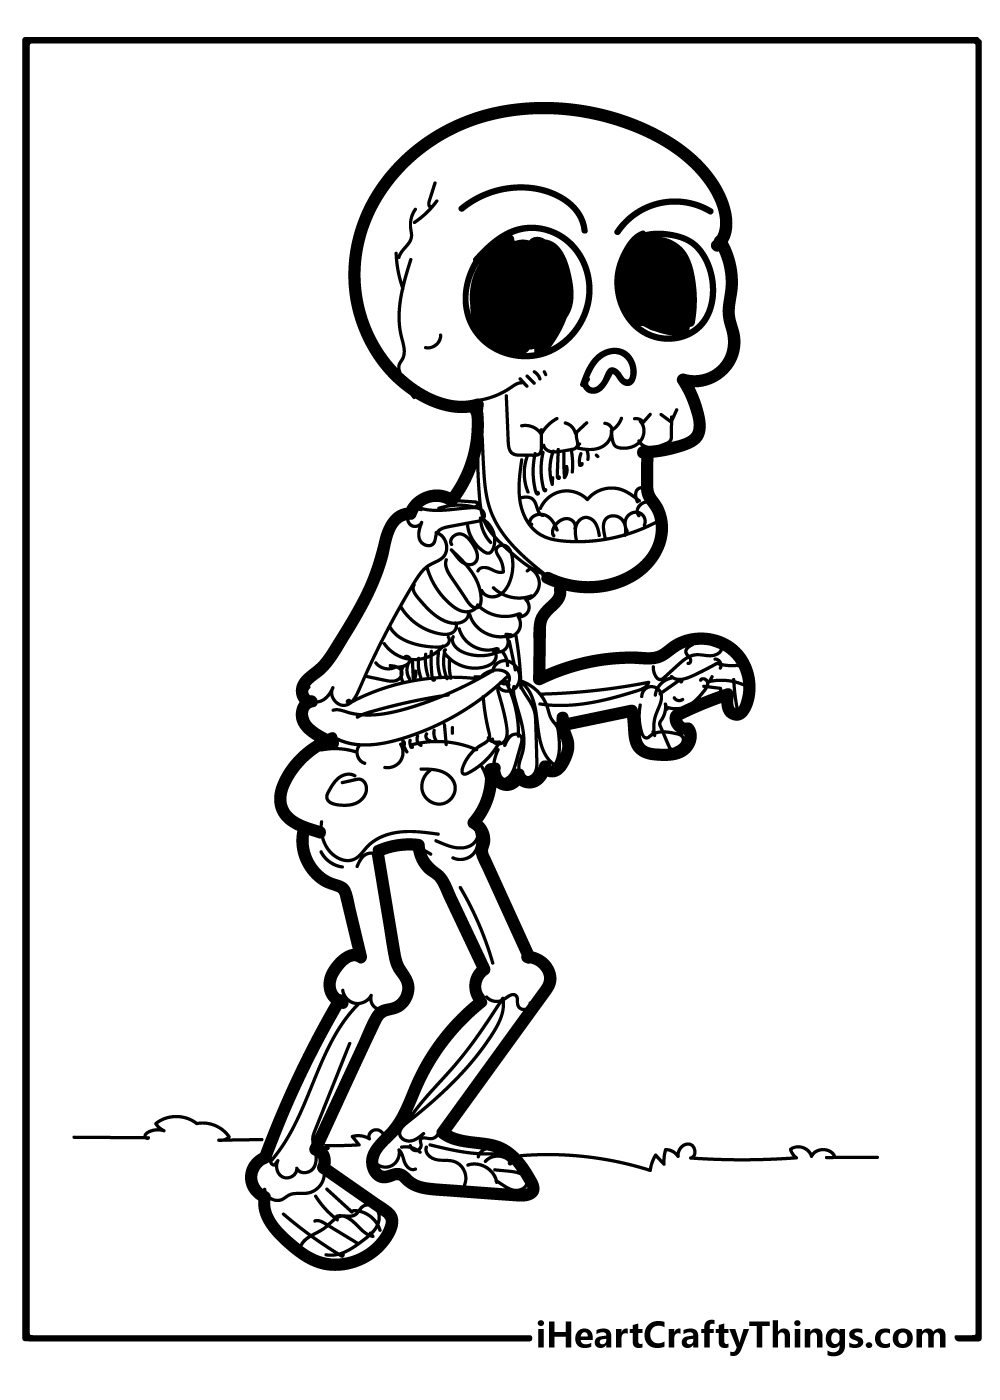 Skeleton Coloring Book for adults free download